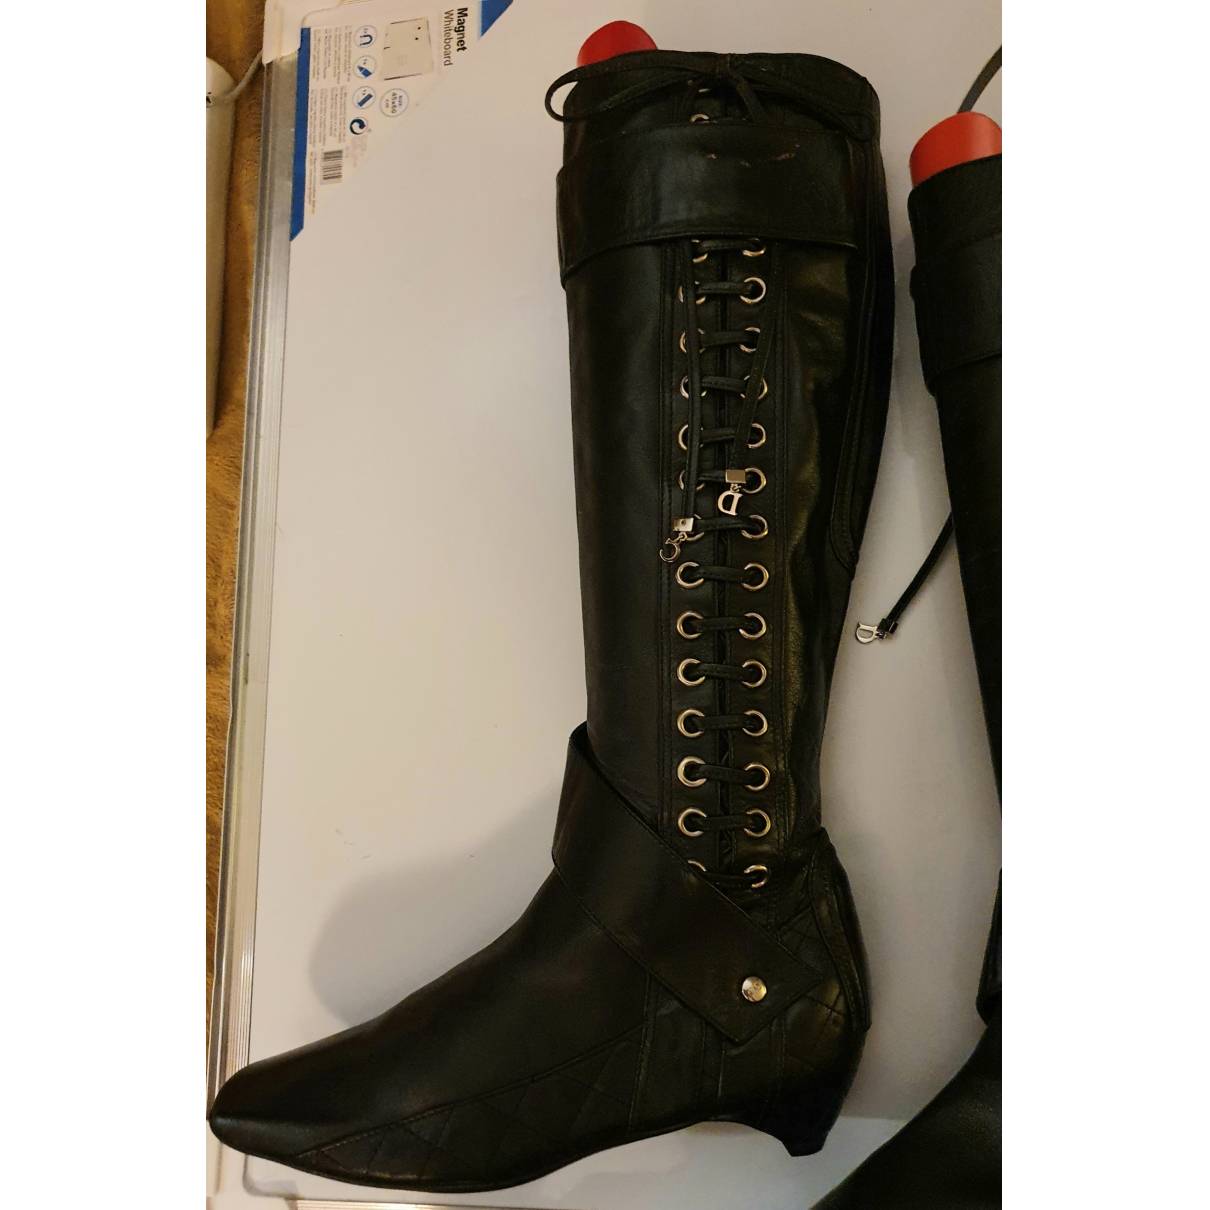 Christian Dior Leather Boots - Black Boots, Shoes - CHR351556